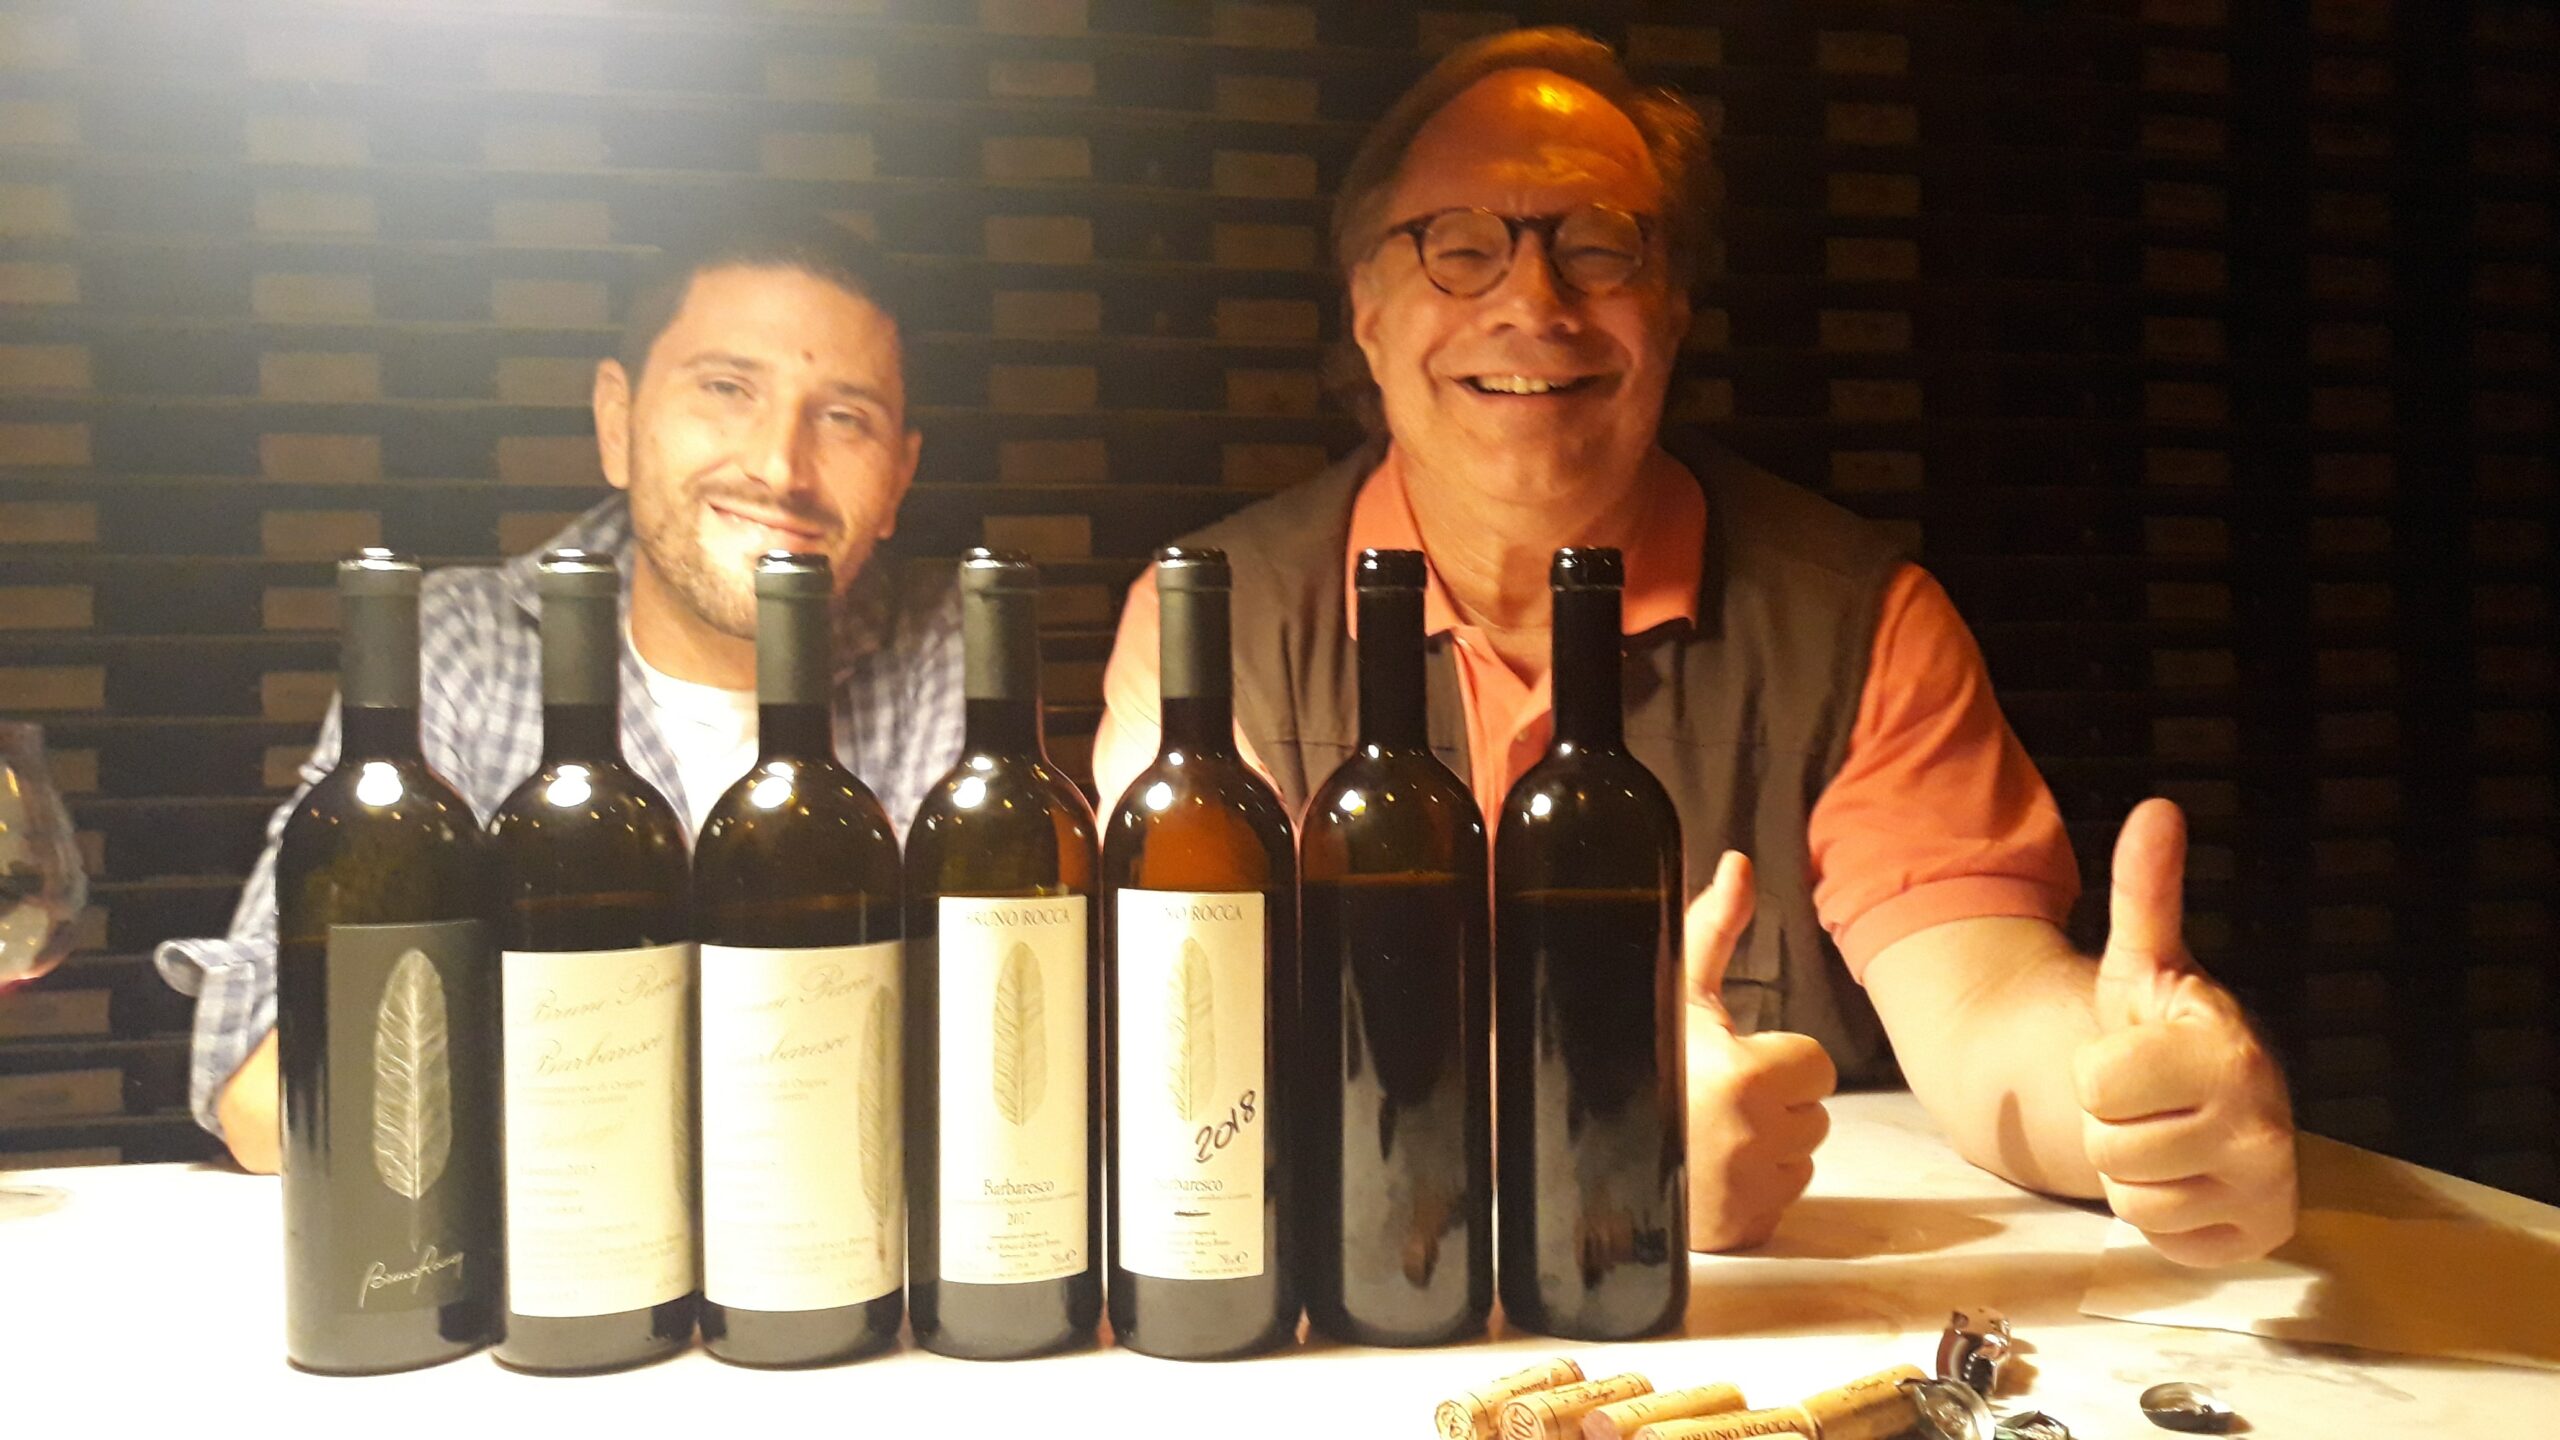 Tasting-at-Bruno-Rocca-revealed-many-great-wines-in-2020-and-one-the-Barbaresco-Riserva-Currà-that-was-one-of-the-years-best-min-scaled-1-1-1-1-1-1-1-1